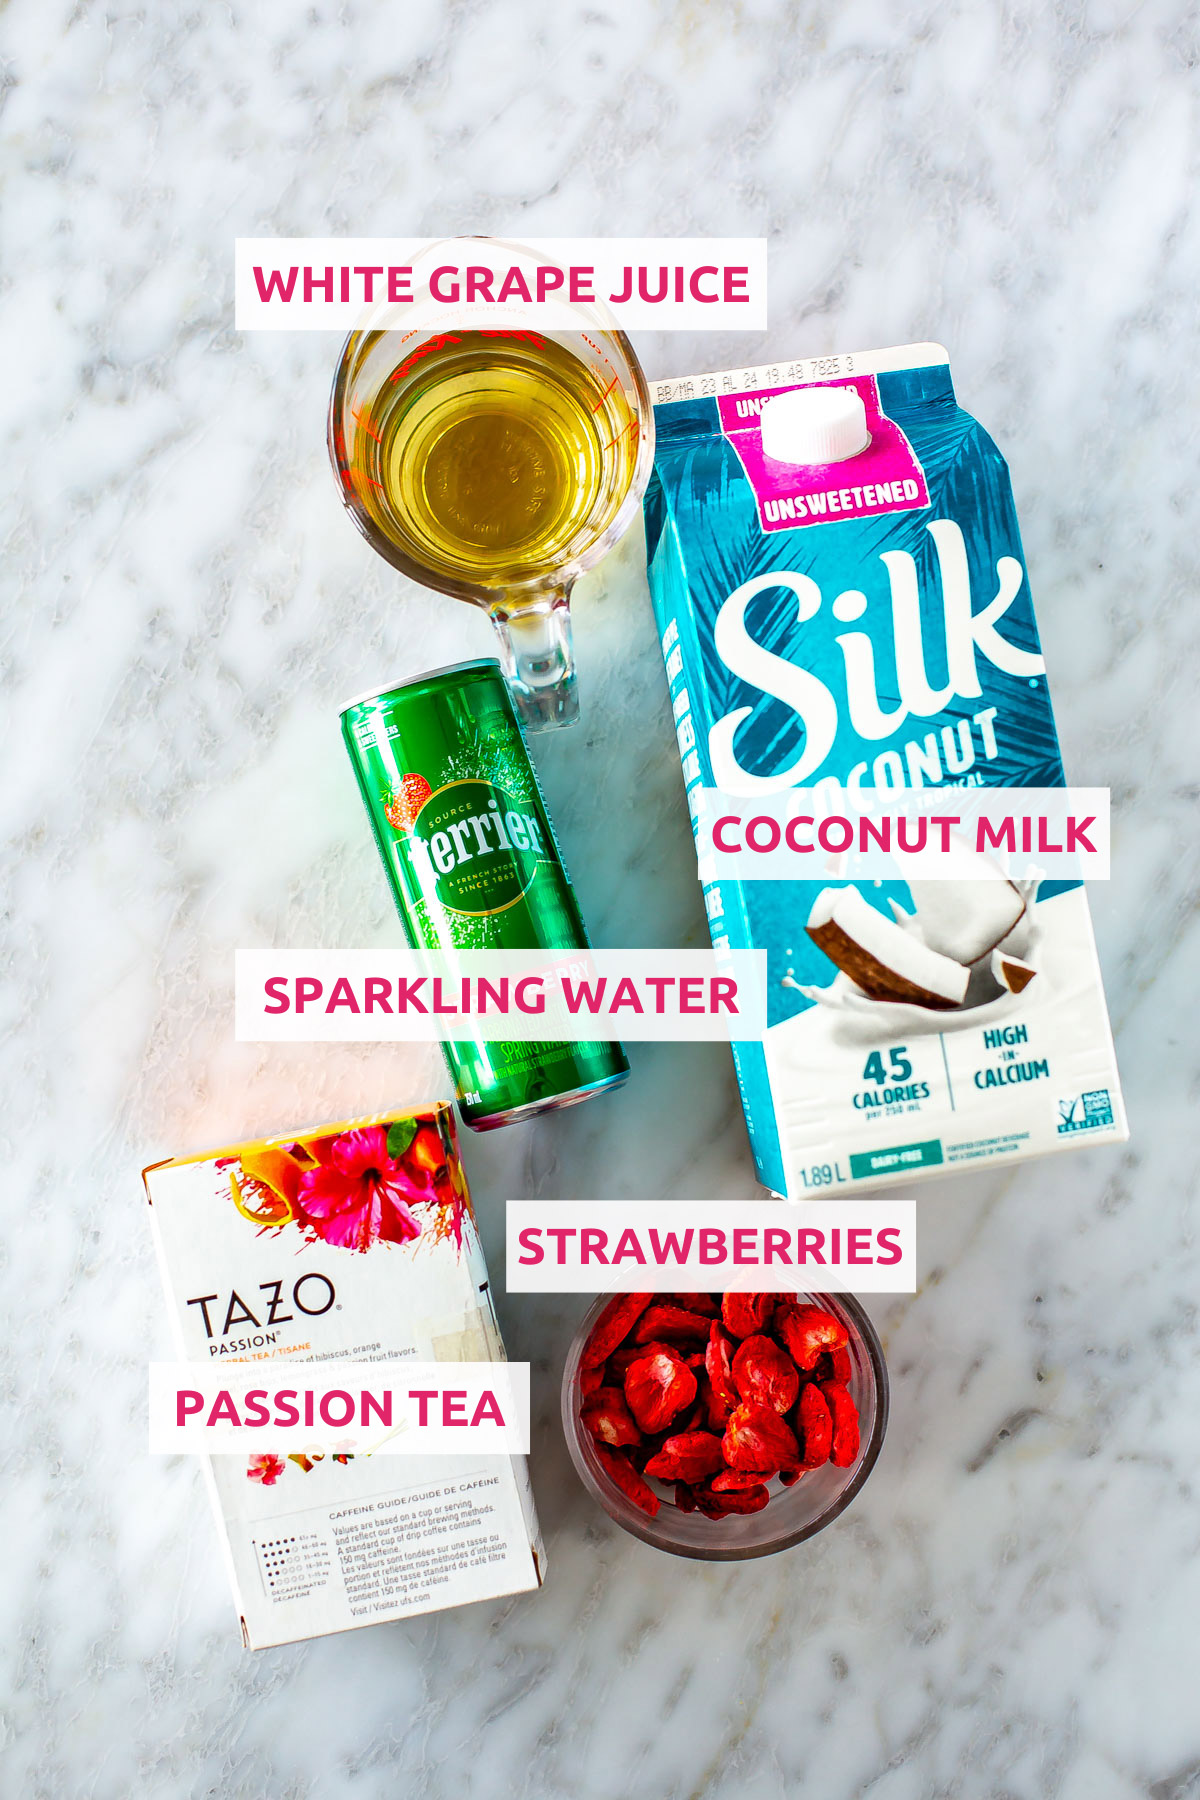 Ingredients for Starbucks pink drink: strawberries, coconut milk, sparkling water, white grape juice and passion tea.